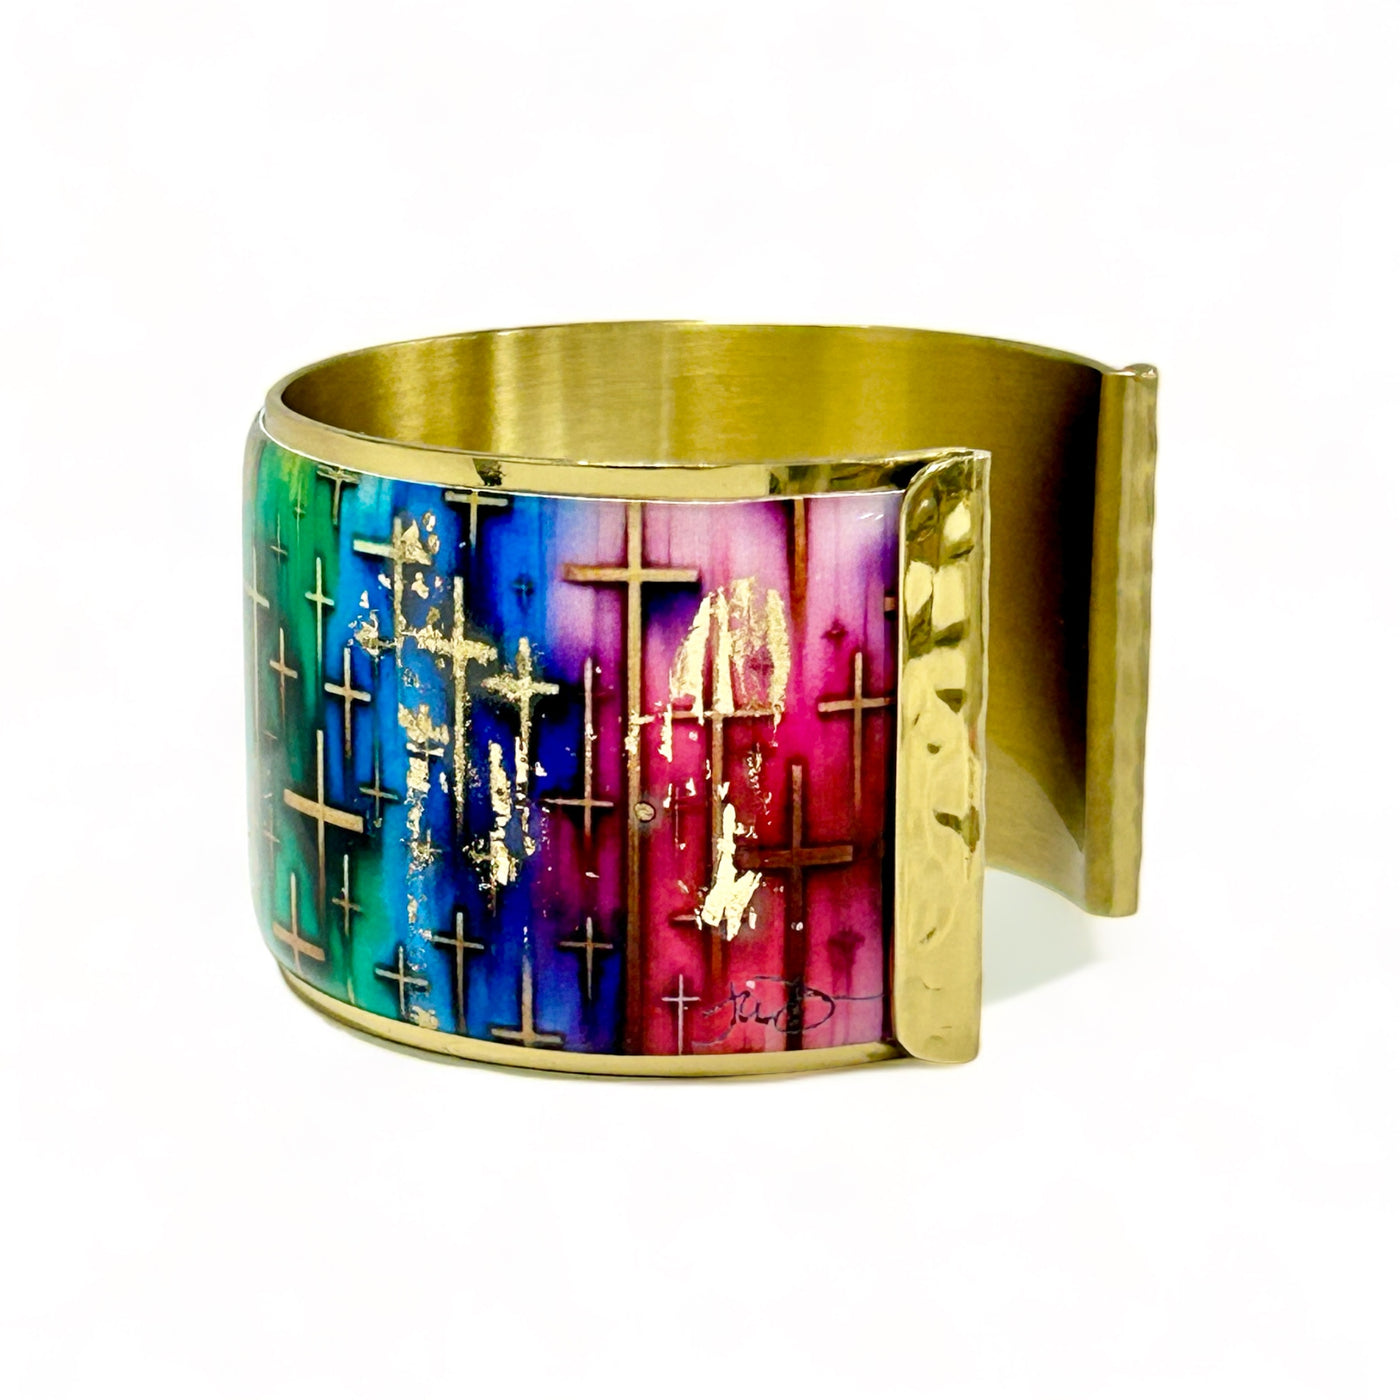 Reigning Metallic Crosses on Colorful Watercolor Cuff